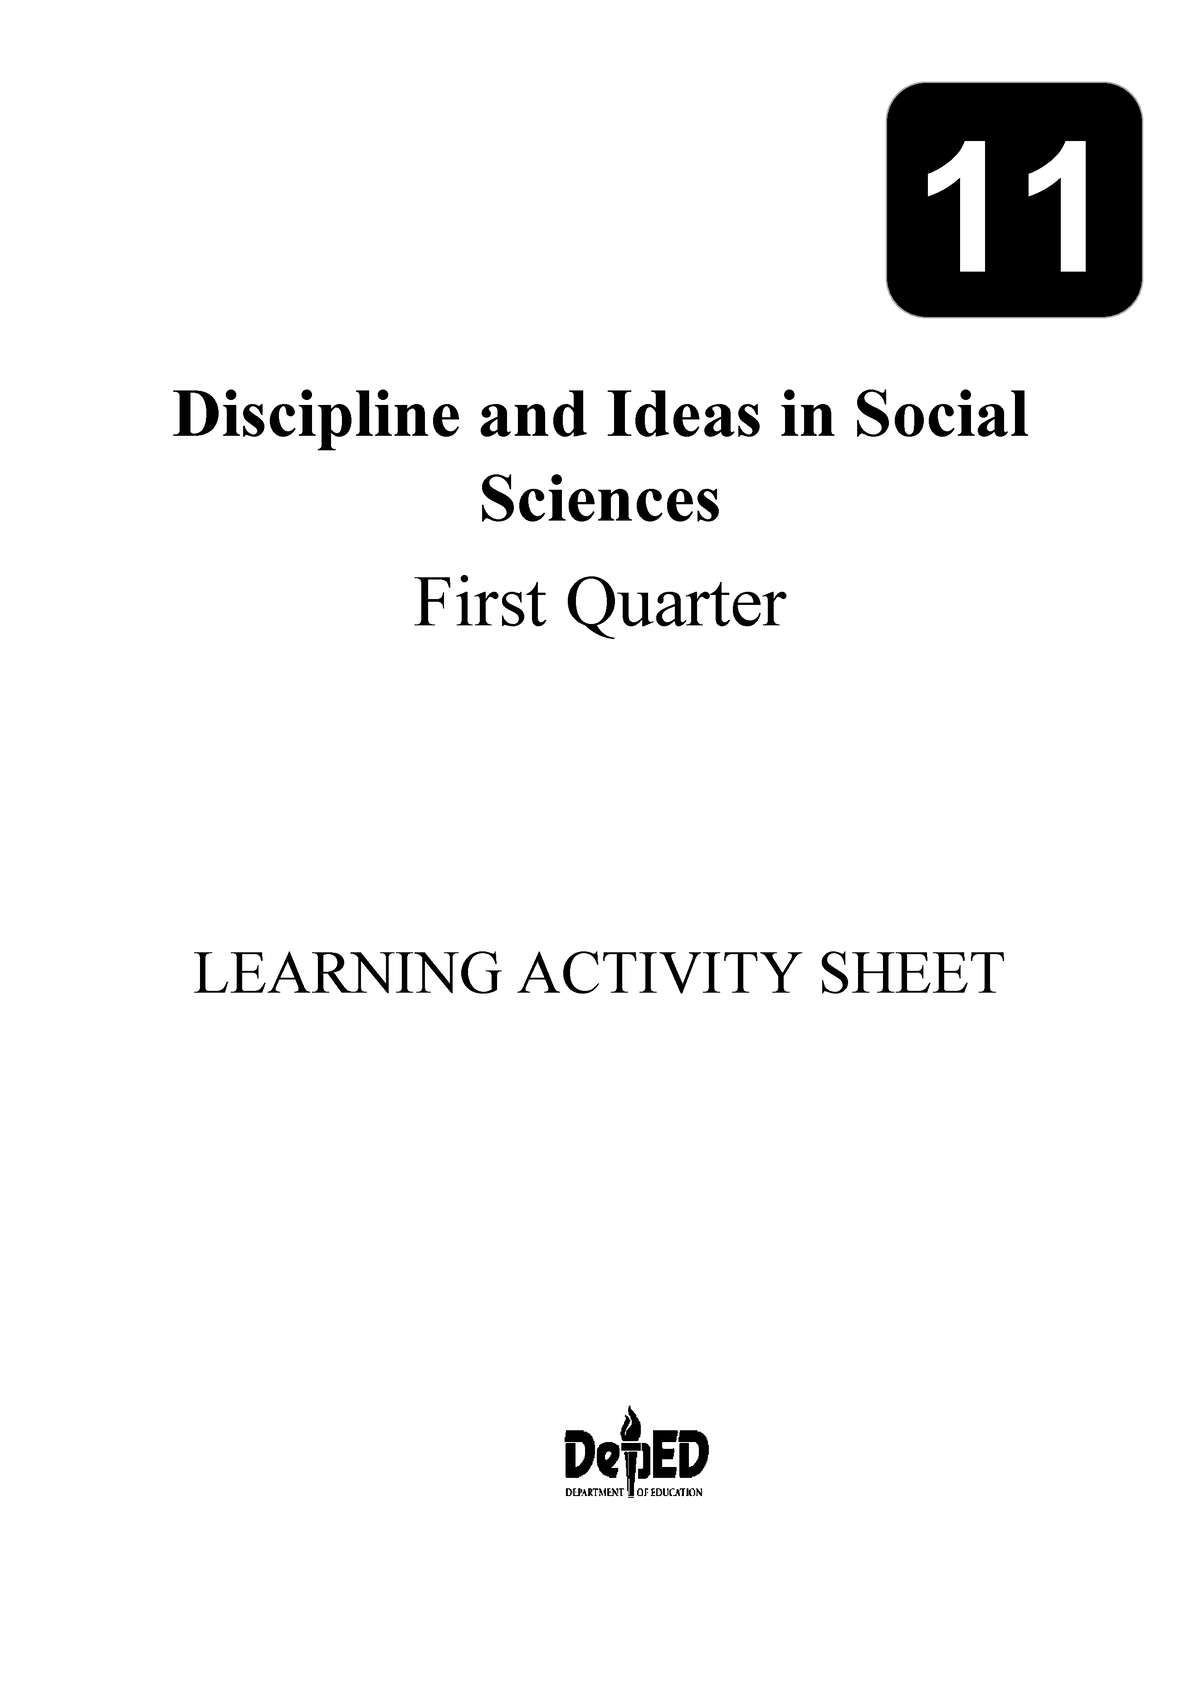 Disciplines In Social Sciences Learning Activity Sheets Discipline And Ideas In Social